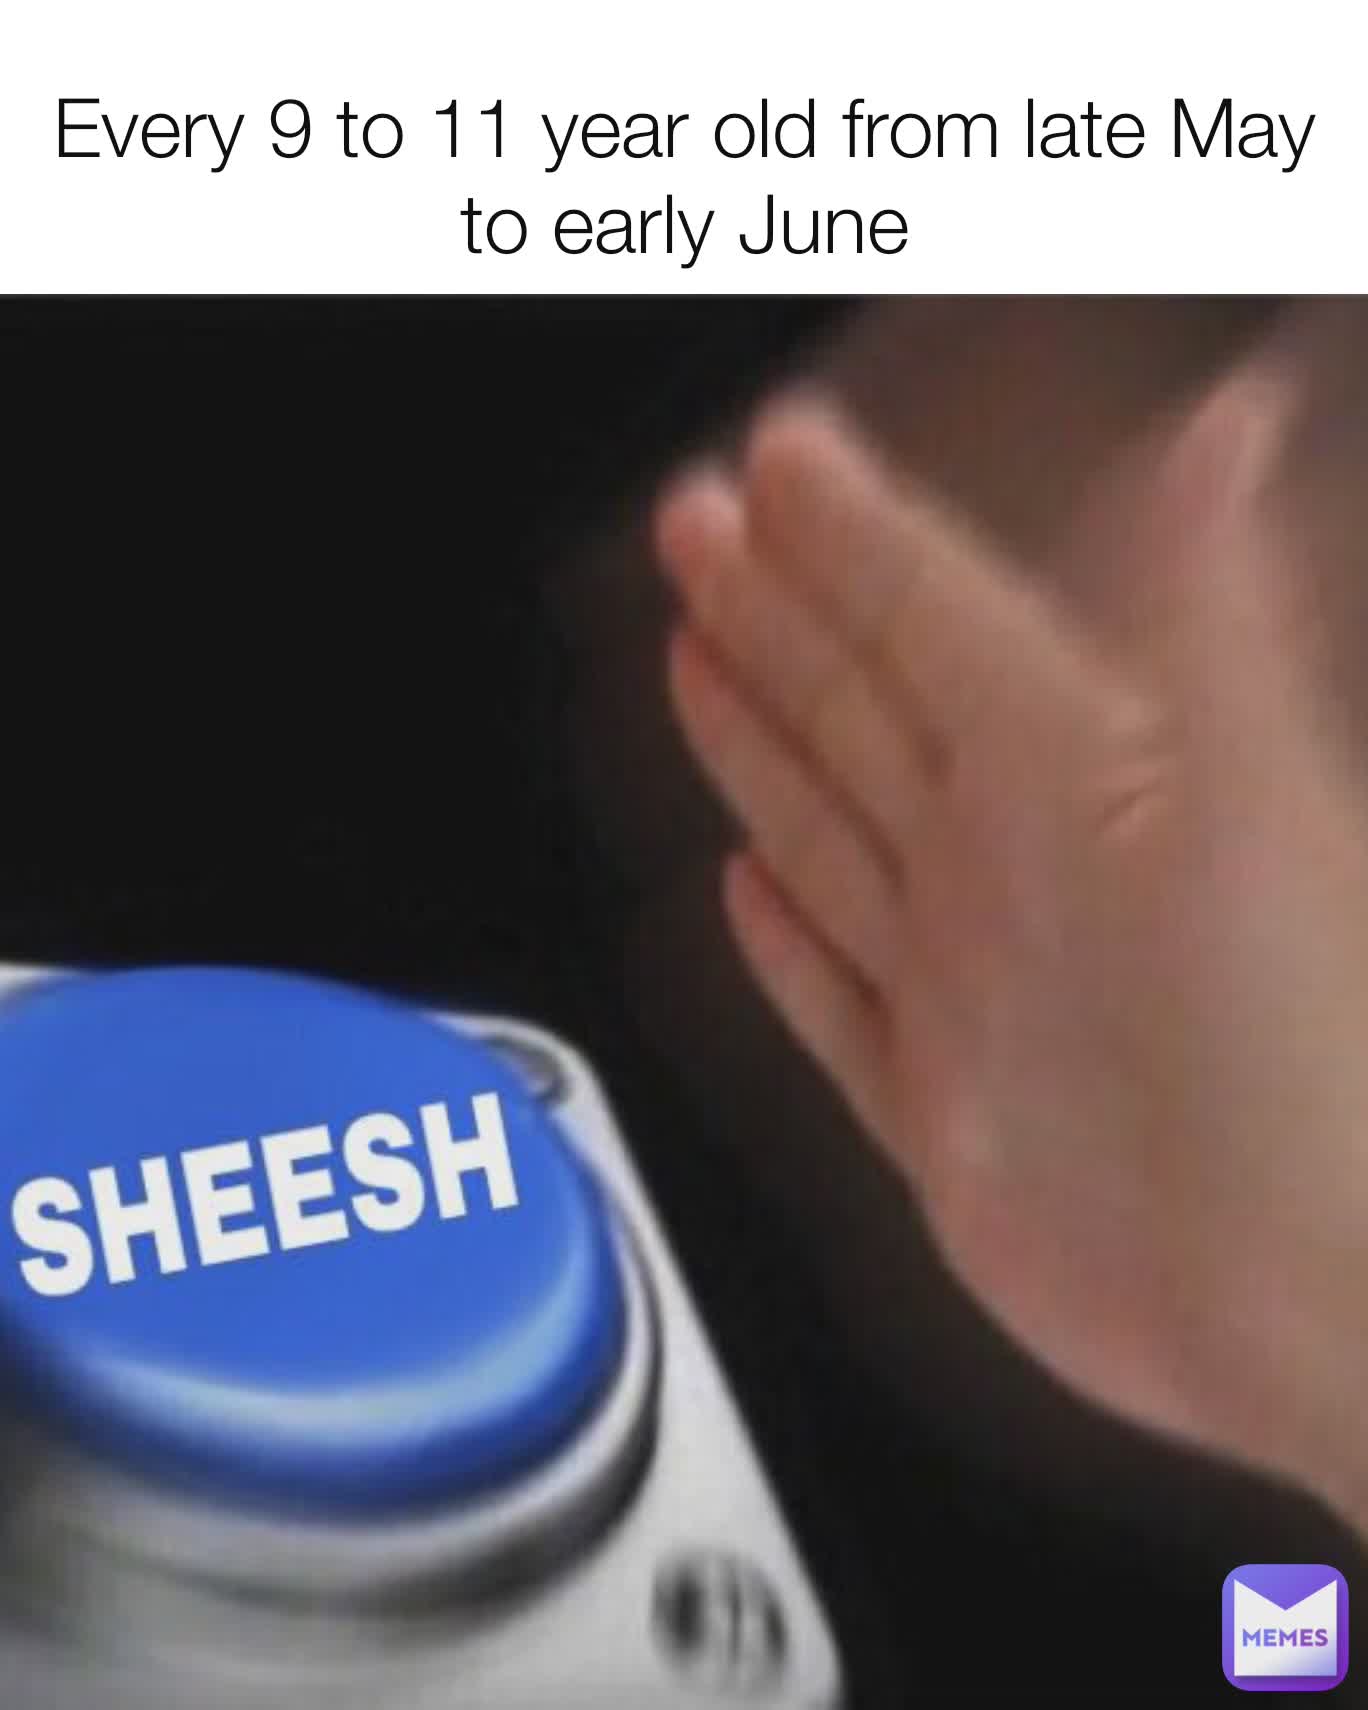 Every 9 to 11 year old from late May to early June